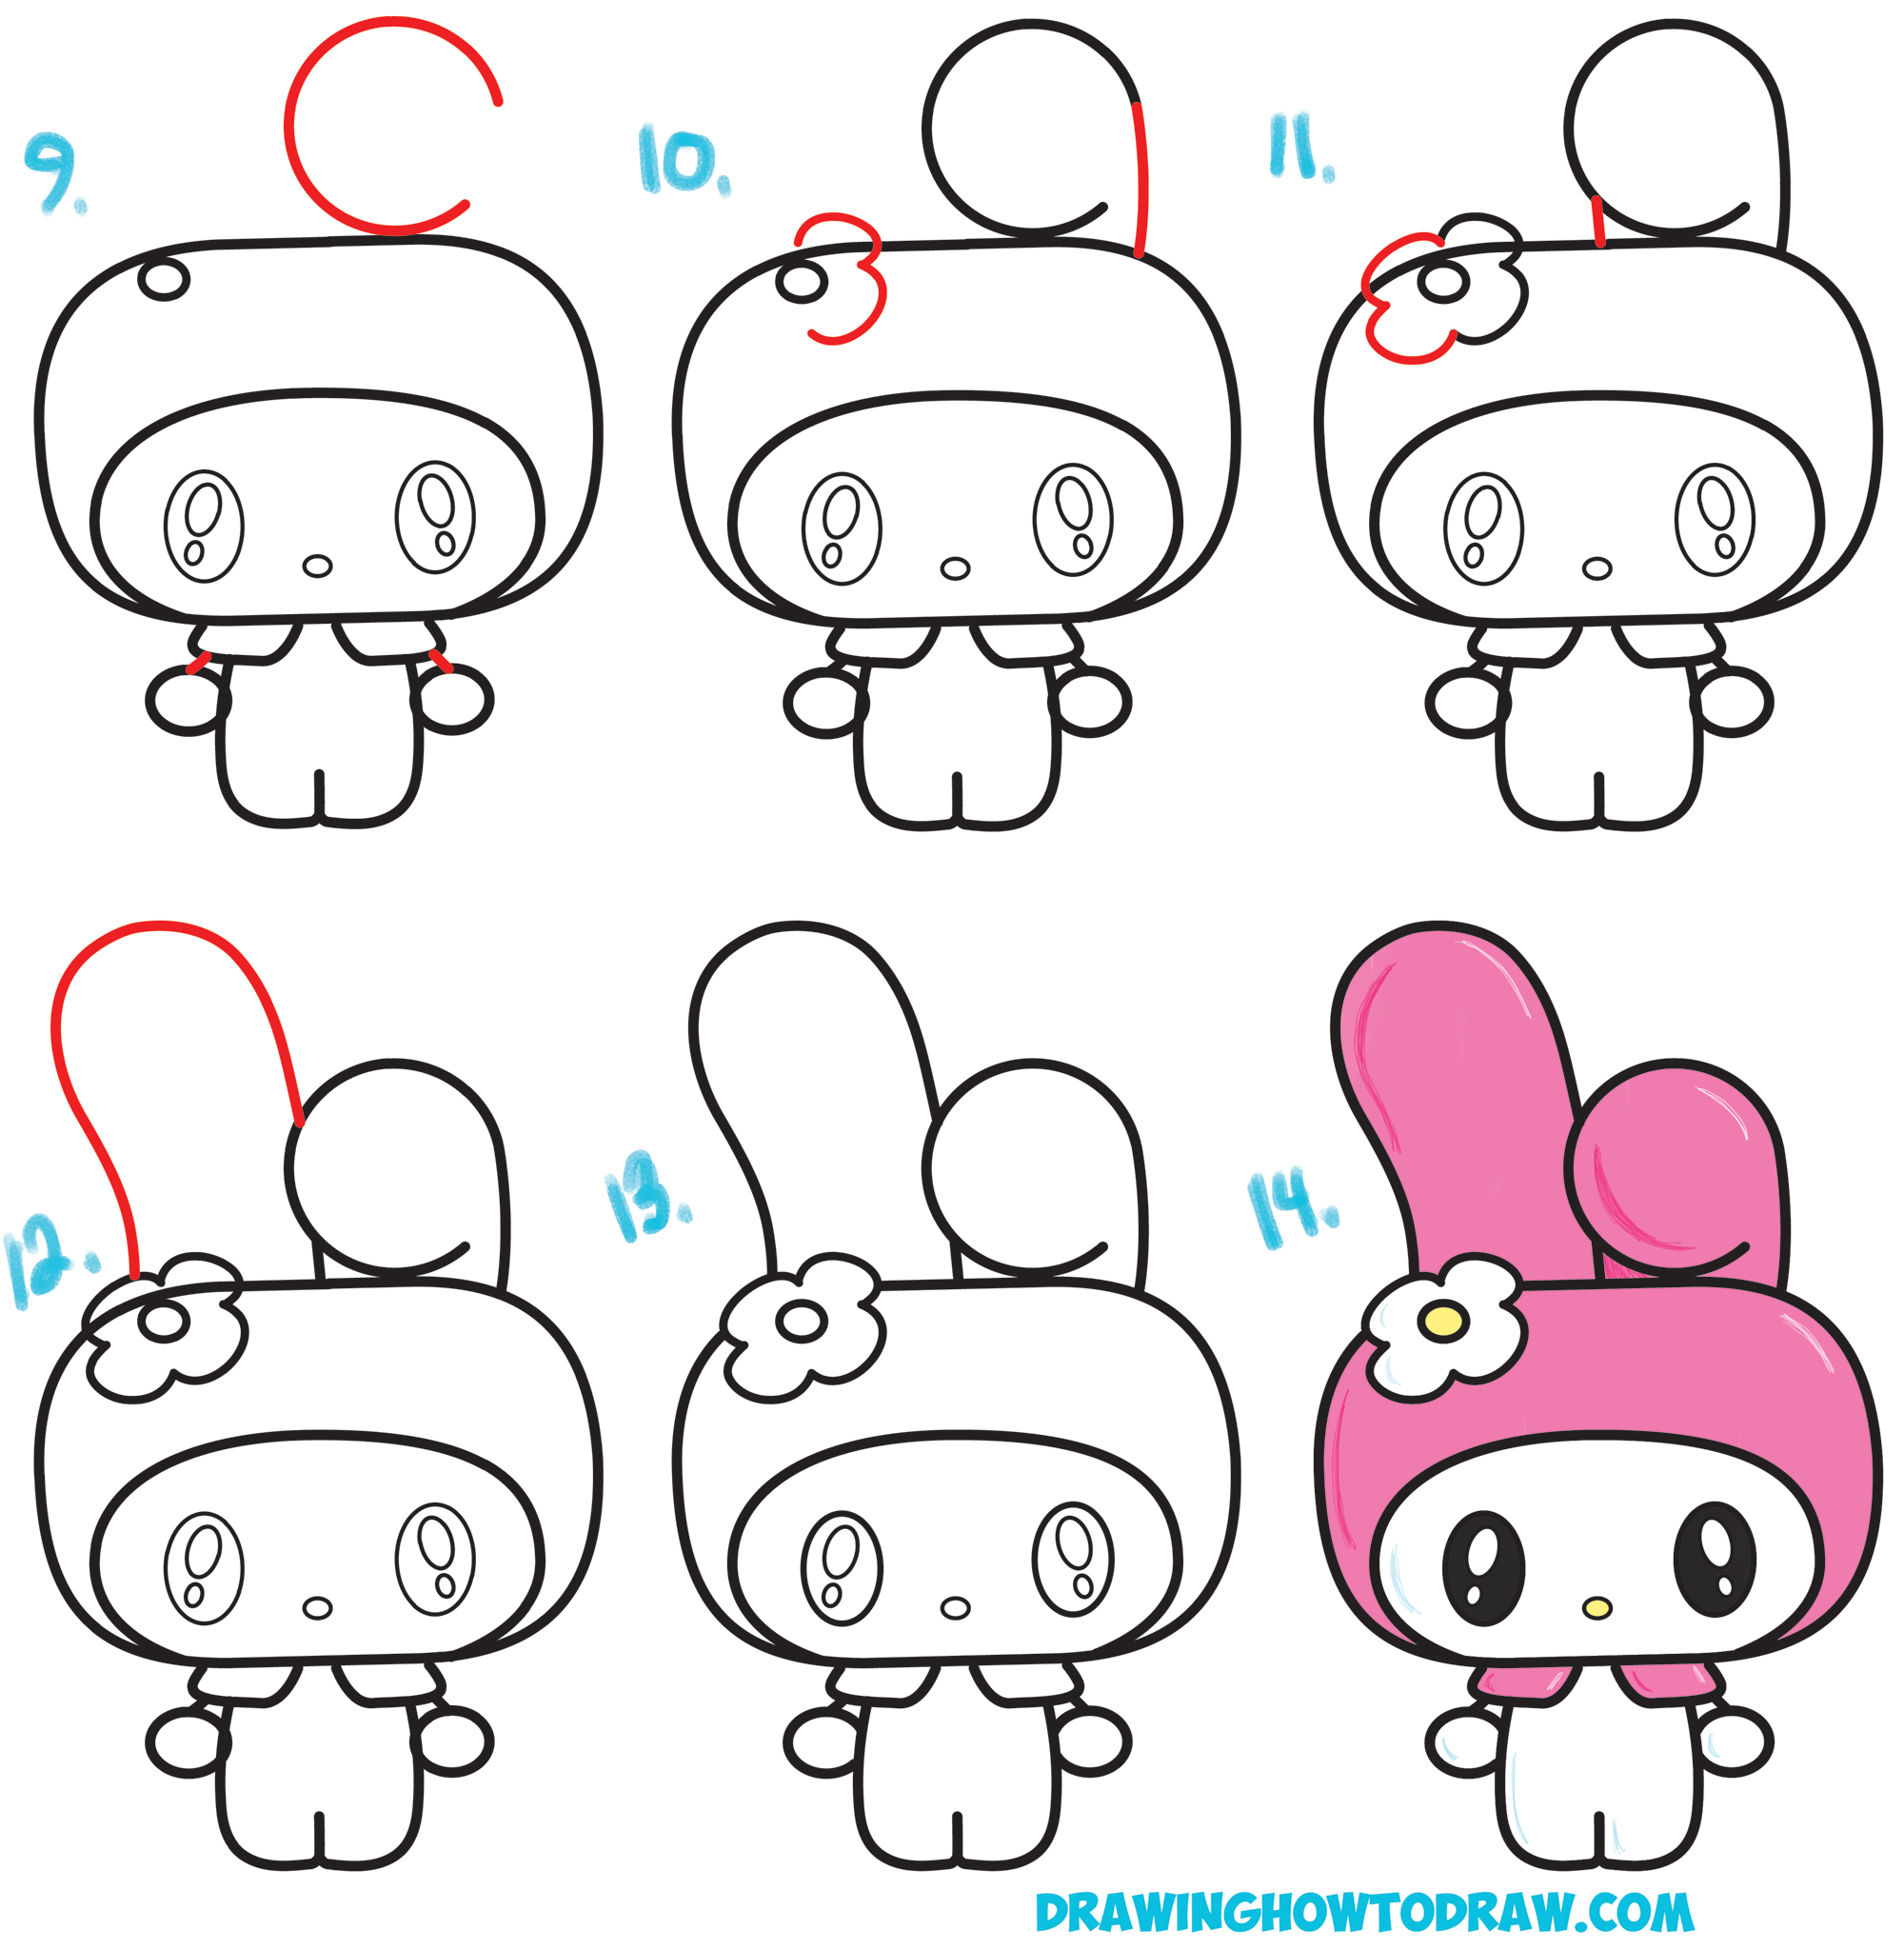 How to draw Hello Kitty step-by-step with simple and easy drawing tutorial